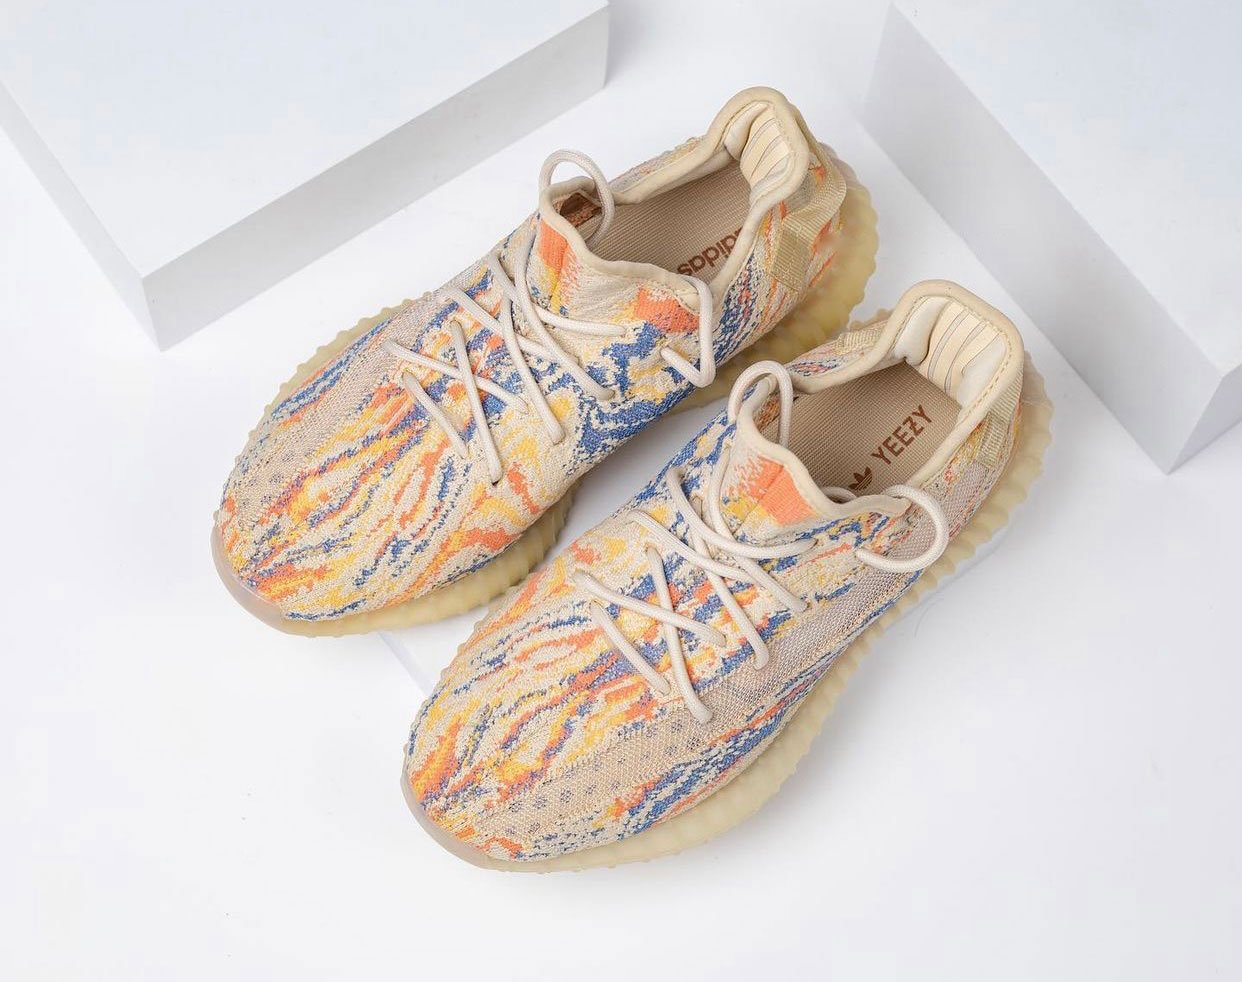 More Dragon Ball Z x adidas Shoe Collaborations Are Releasing Mx Oat GW3773 Release Date